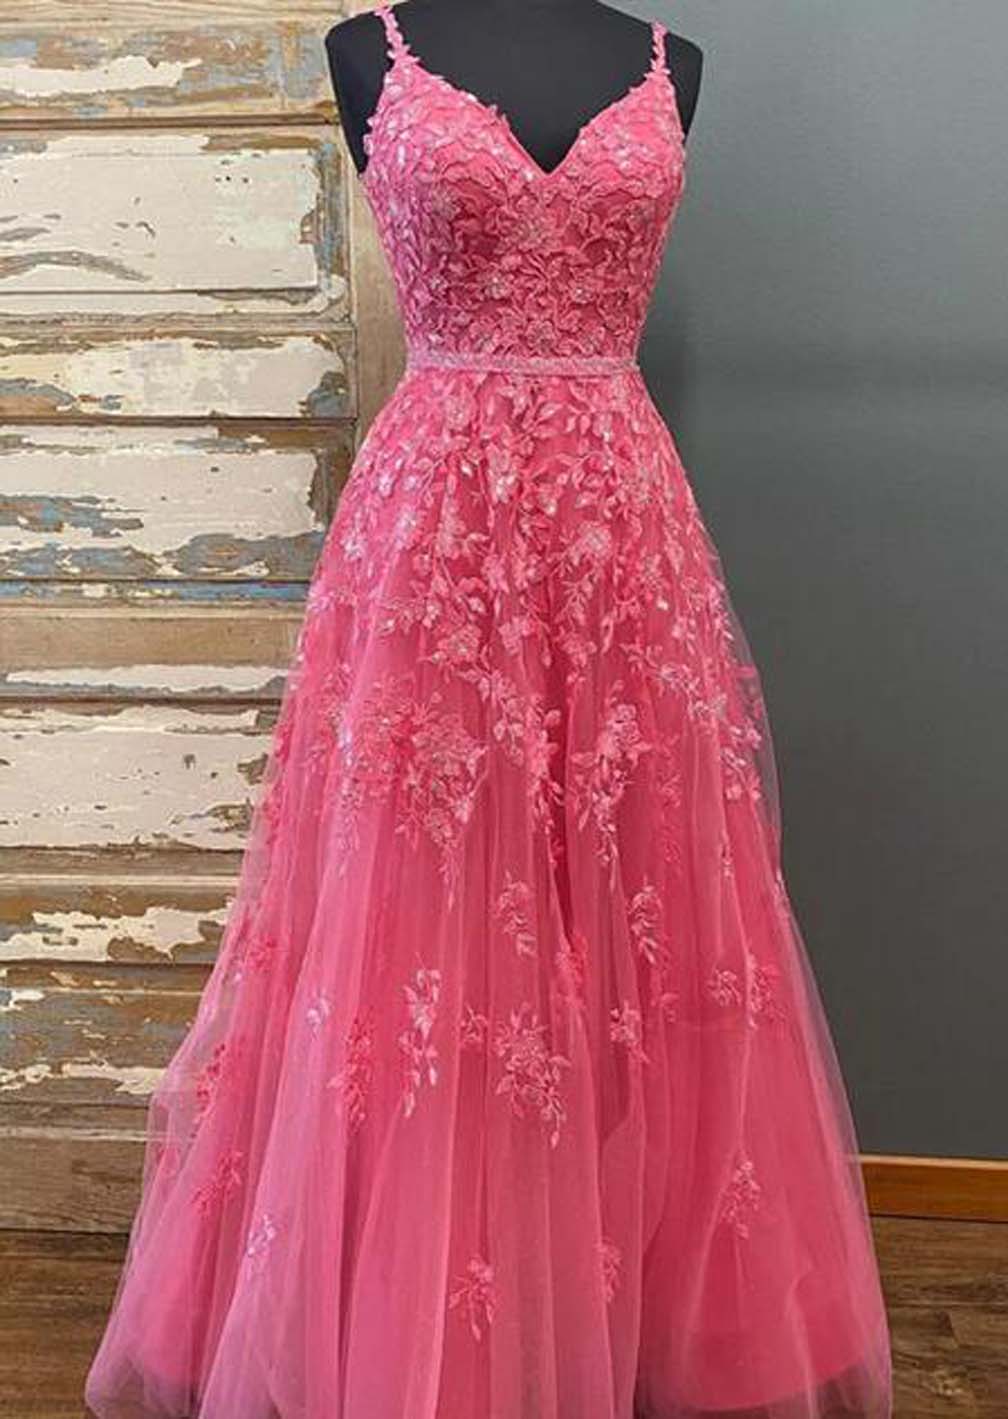 Women Lace Appliques Prom Dresses Long Spaghetti Strap Evening Party Gowns Sleeveless Formal Dress Yp068